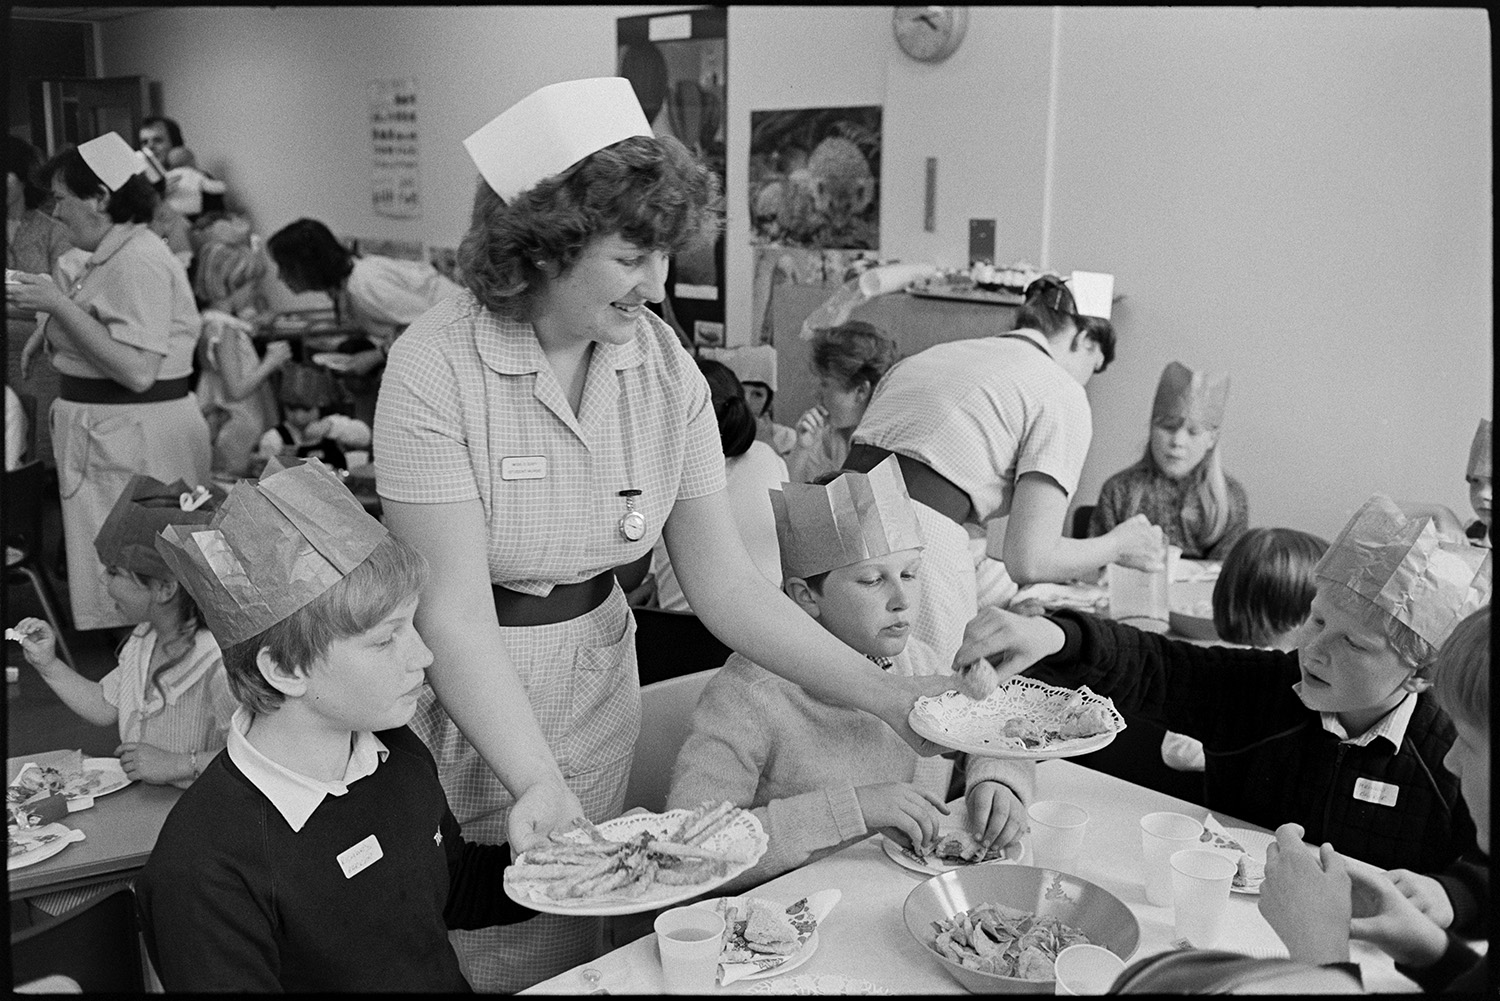 Party in children's ward of hospital, food and drink, nurses serving. 
[A nurse serving sandwiches and cakes to children at a party on the Children's Ward at Barnstaple General Hospital.]